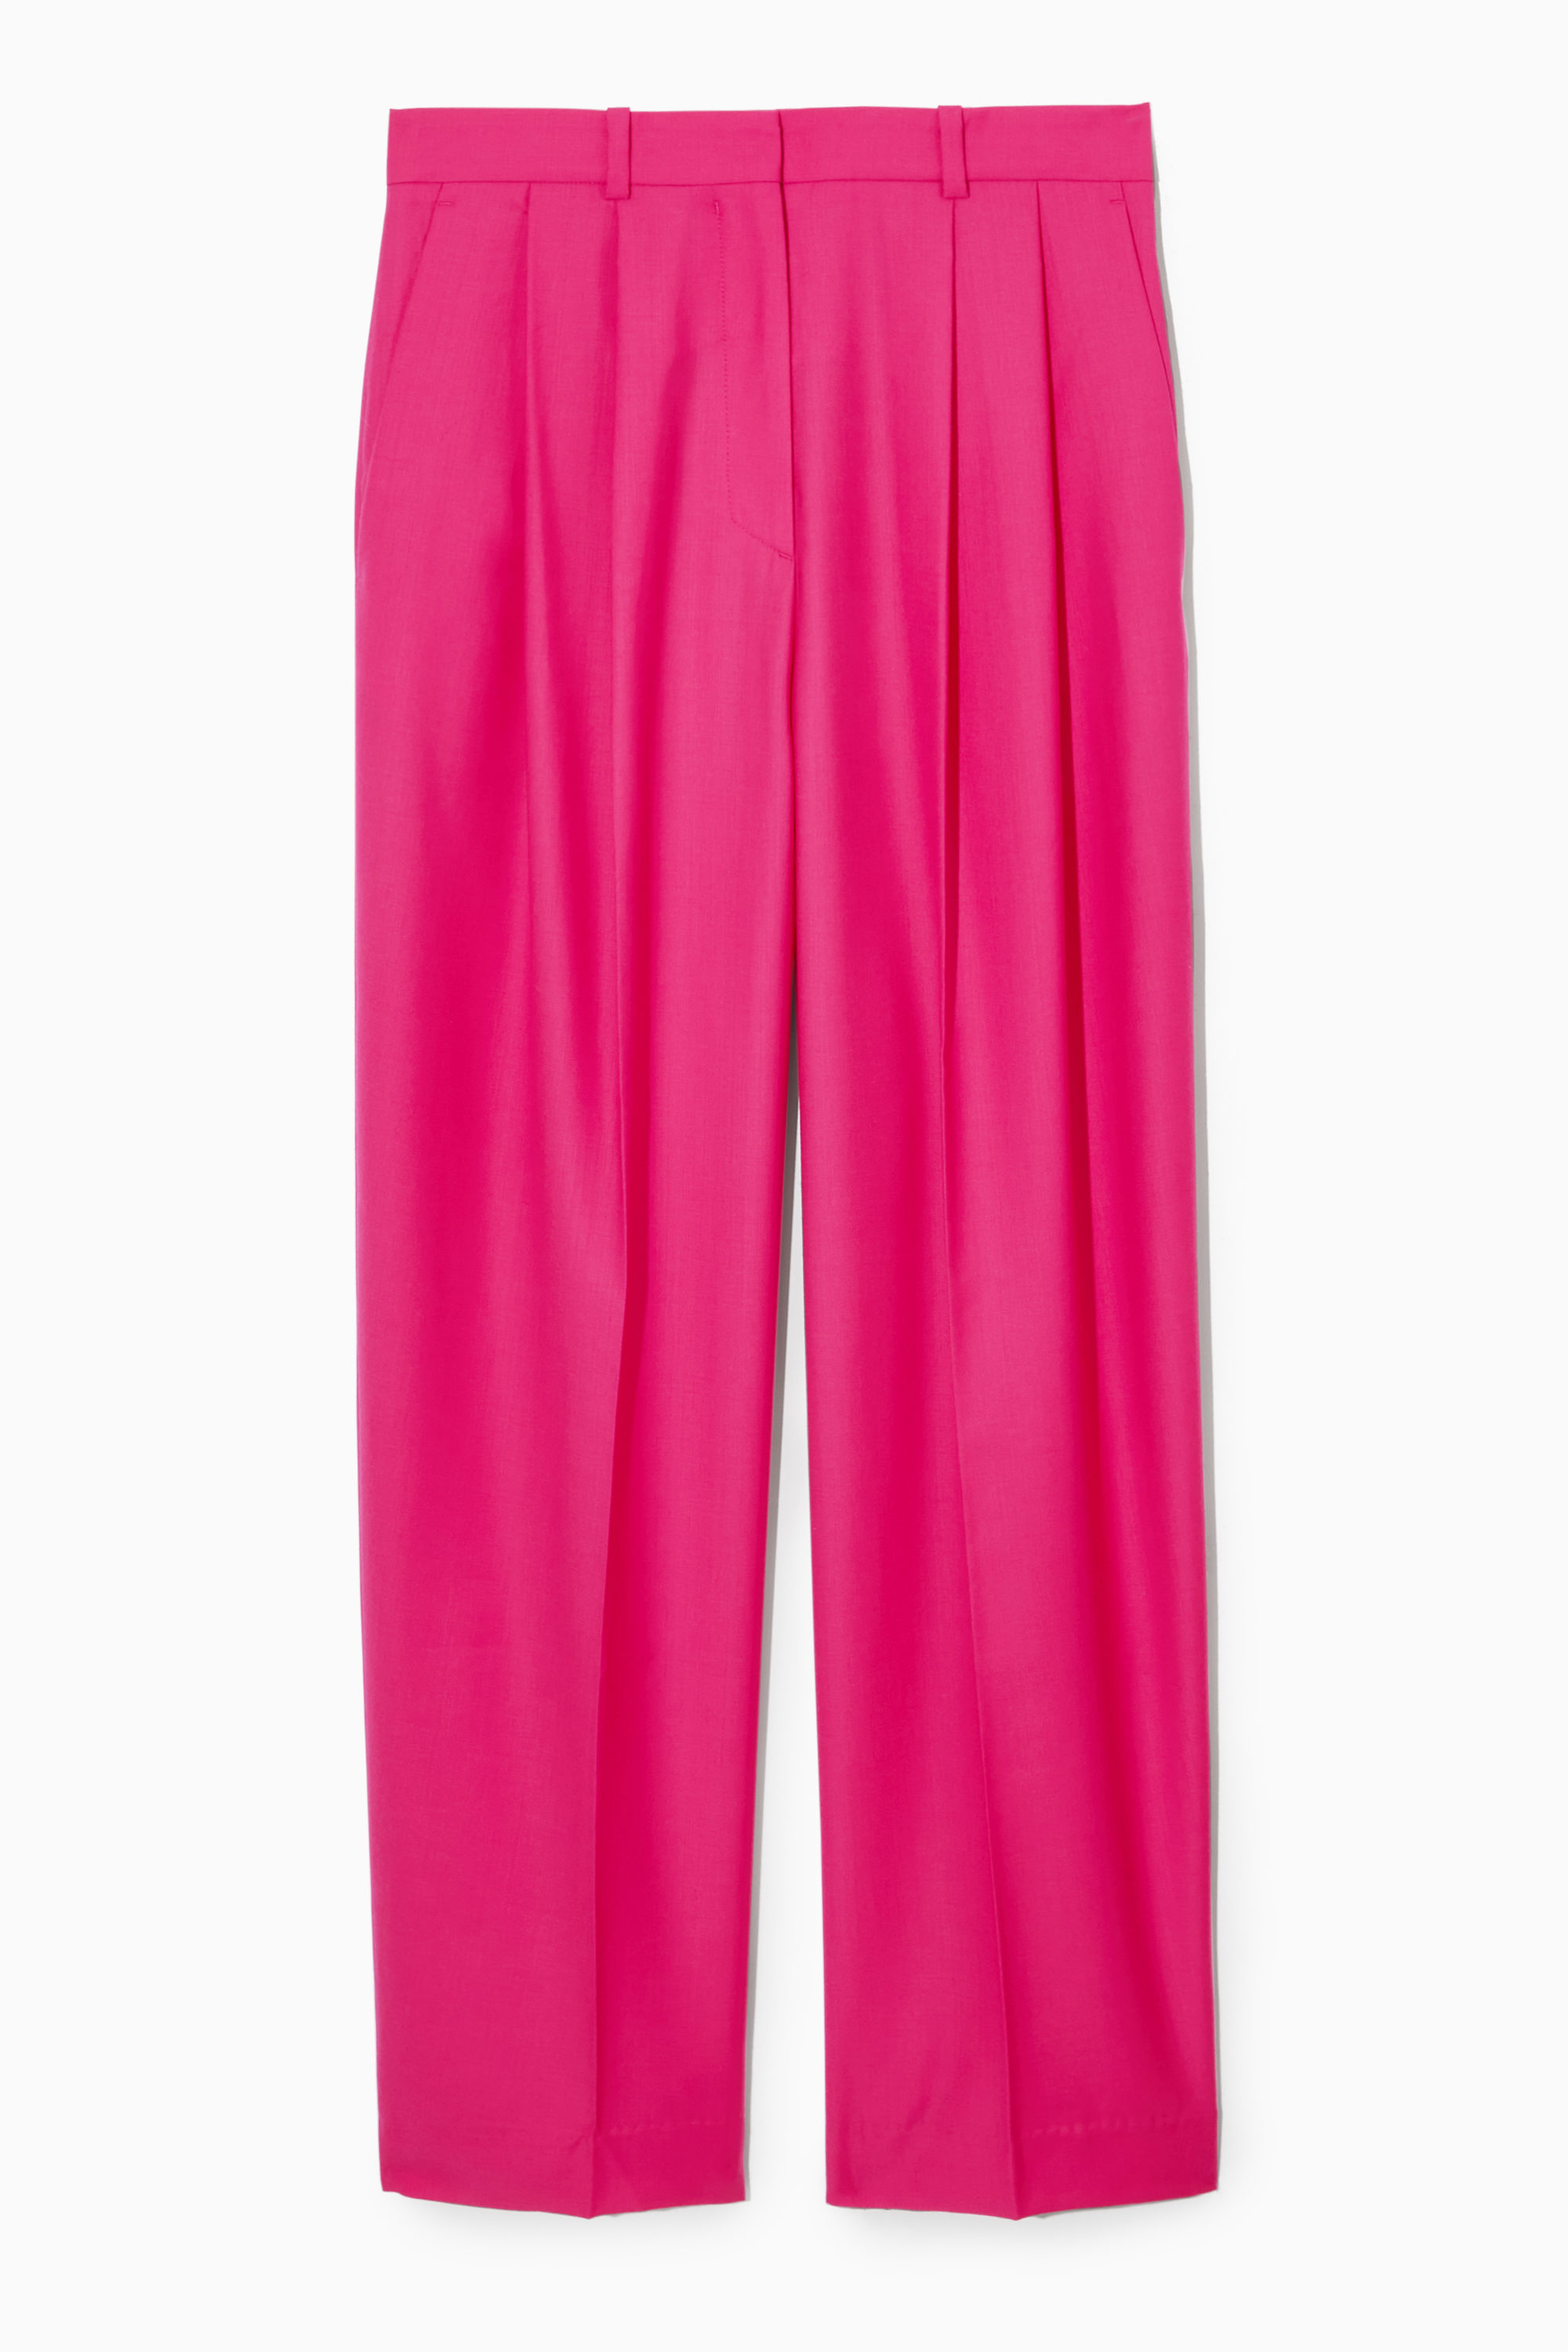 YOURS Plus Size Curve Bright Pink Darted Waist Tapered Trousers | Tapered  trousers, Light pink tops, Size 16 women